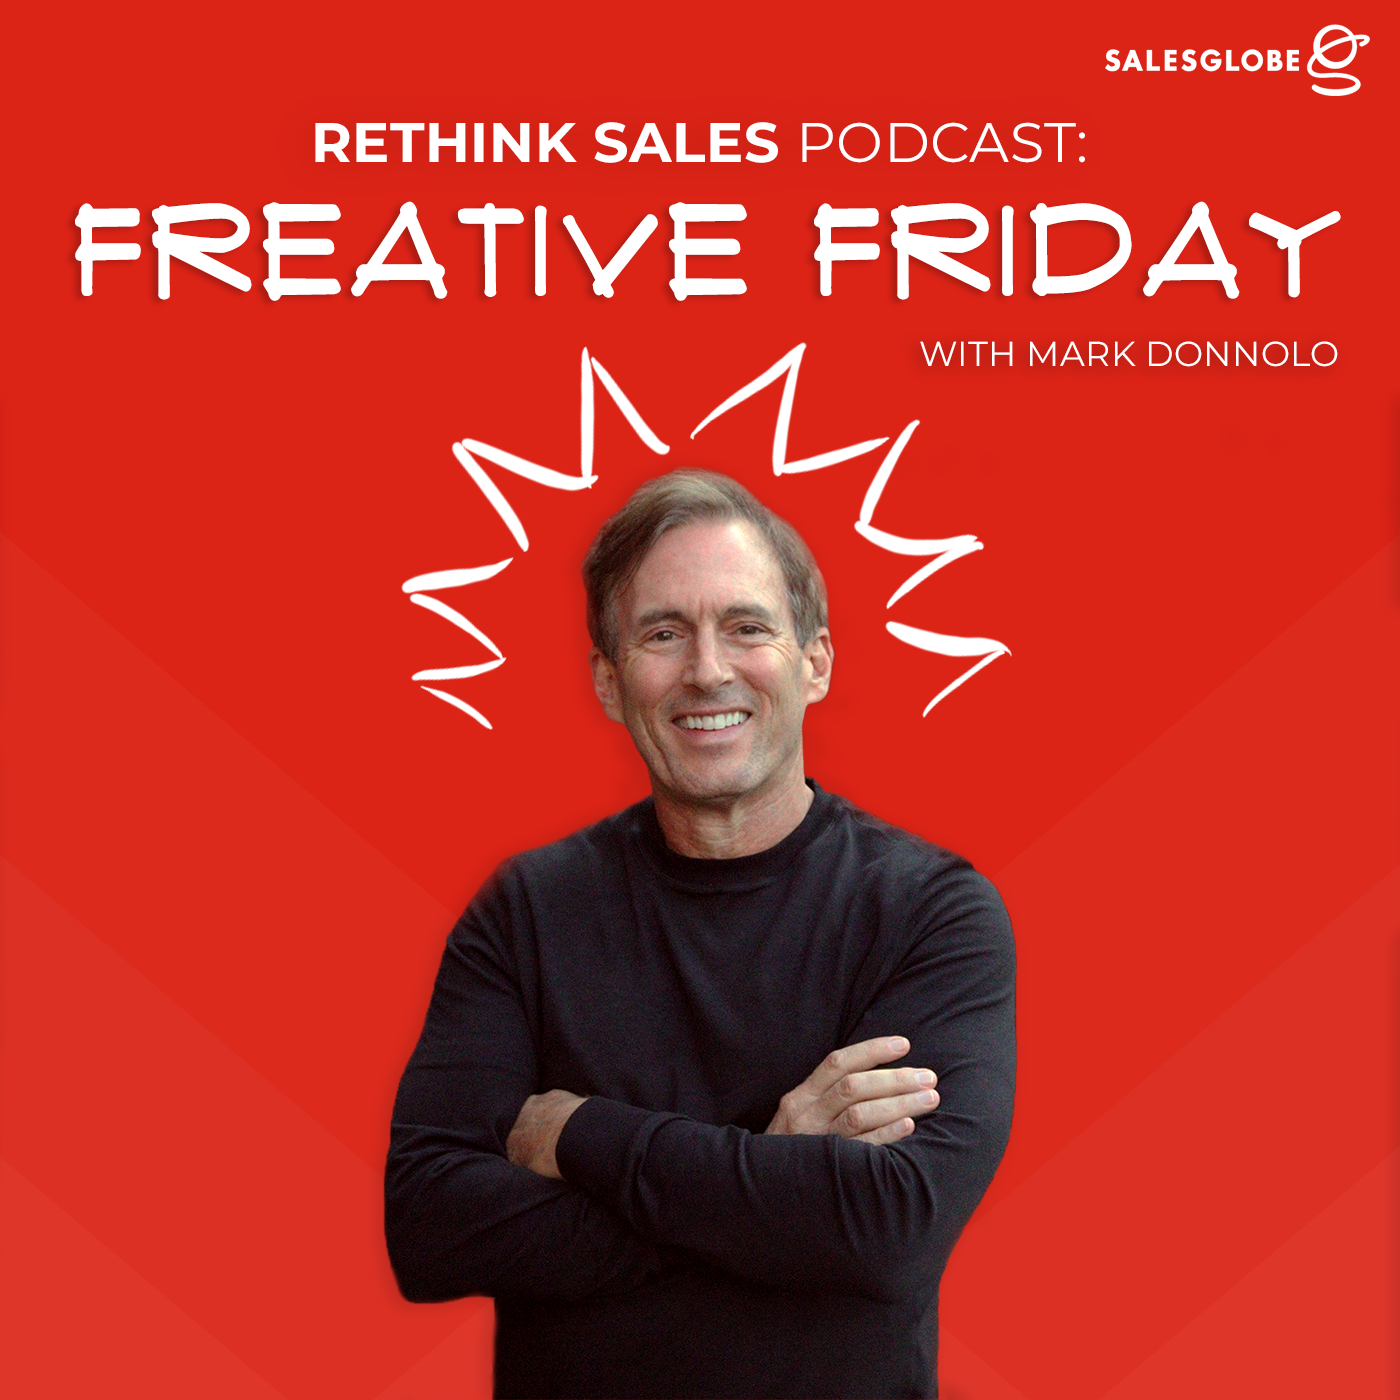 61: Freative Friday - Who is ROSI?